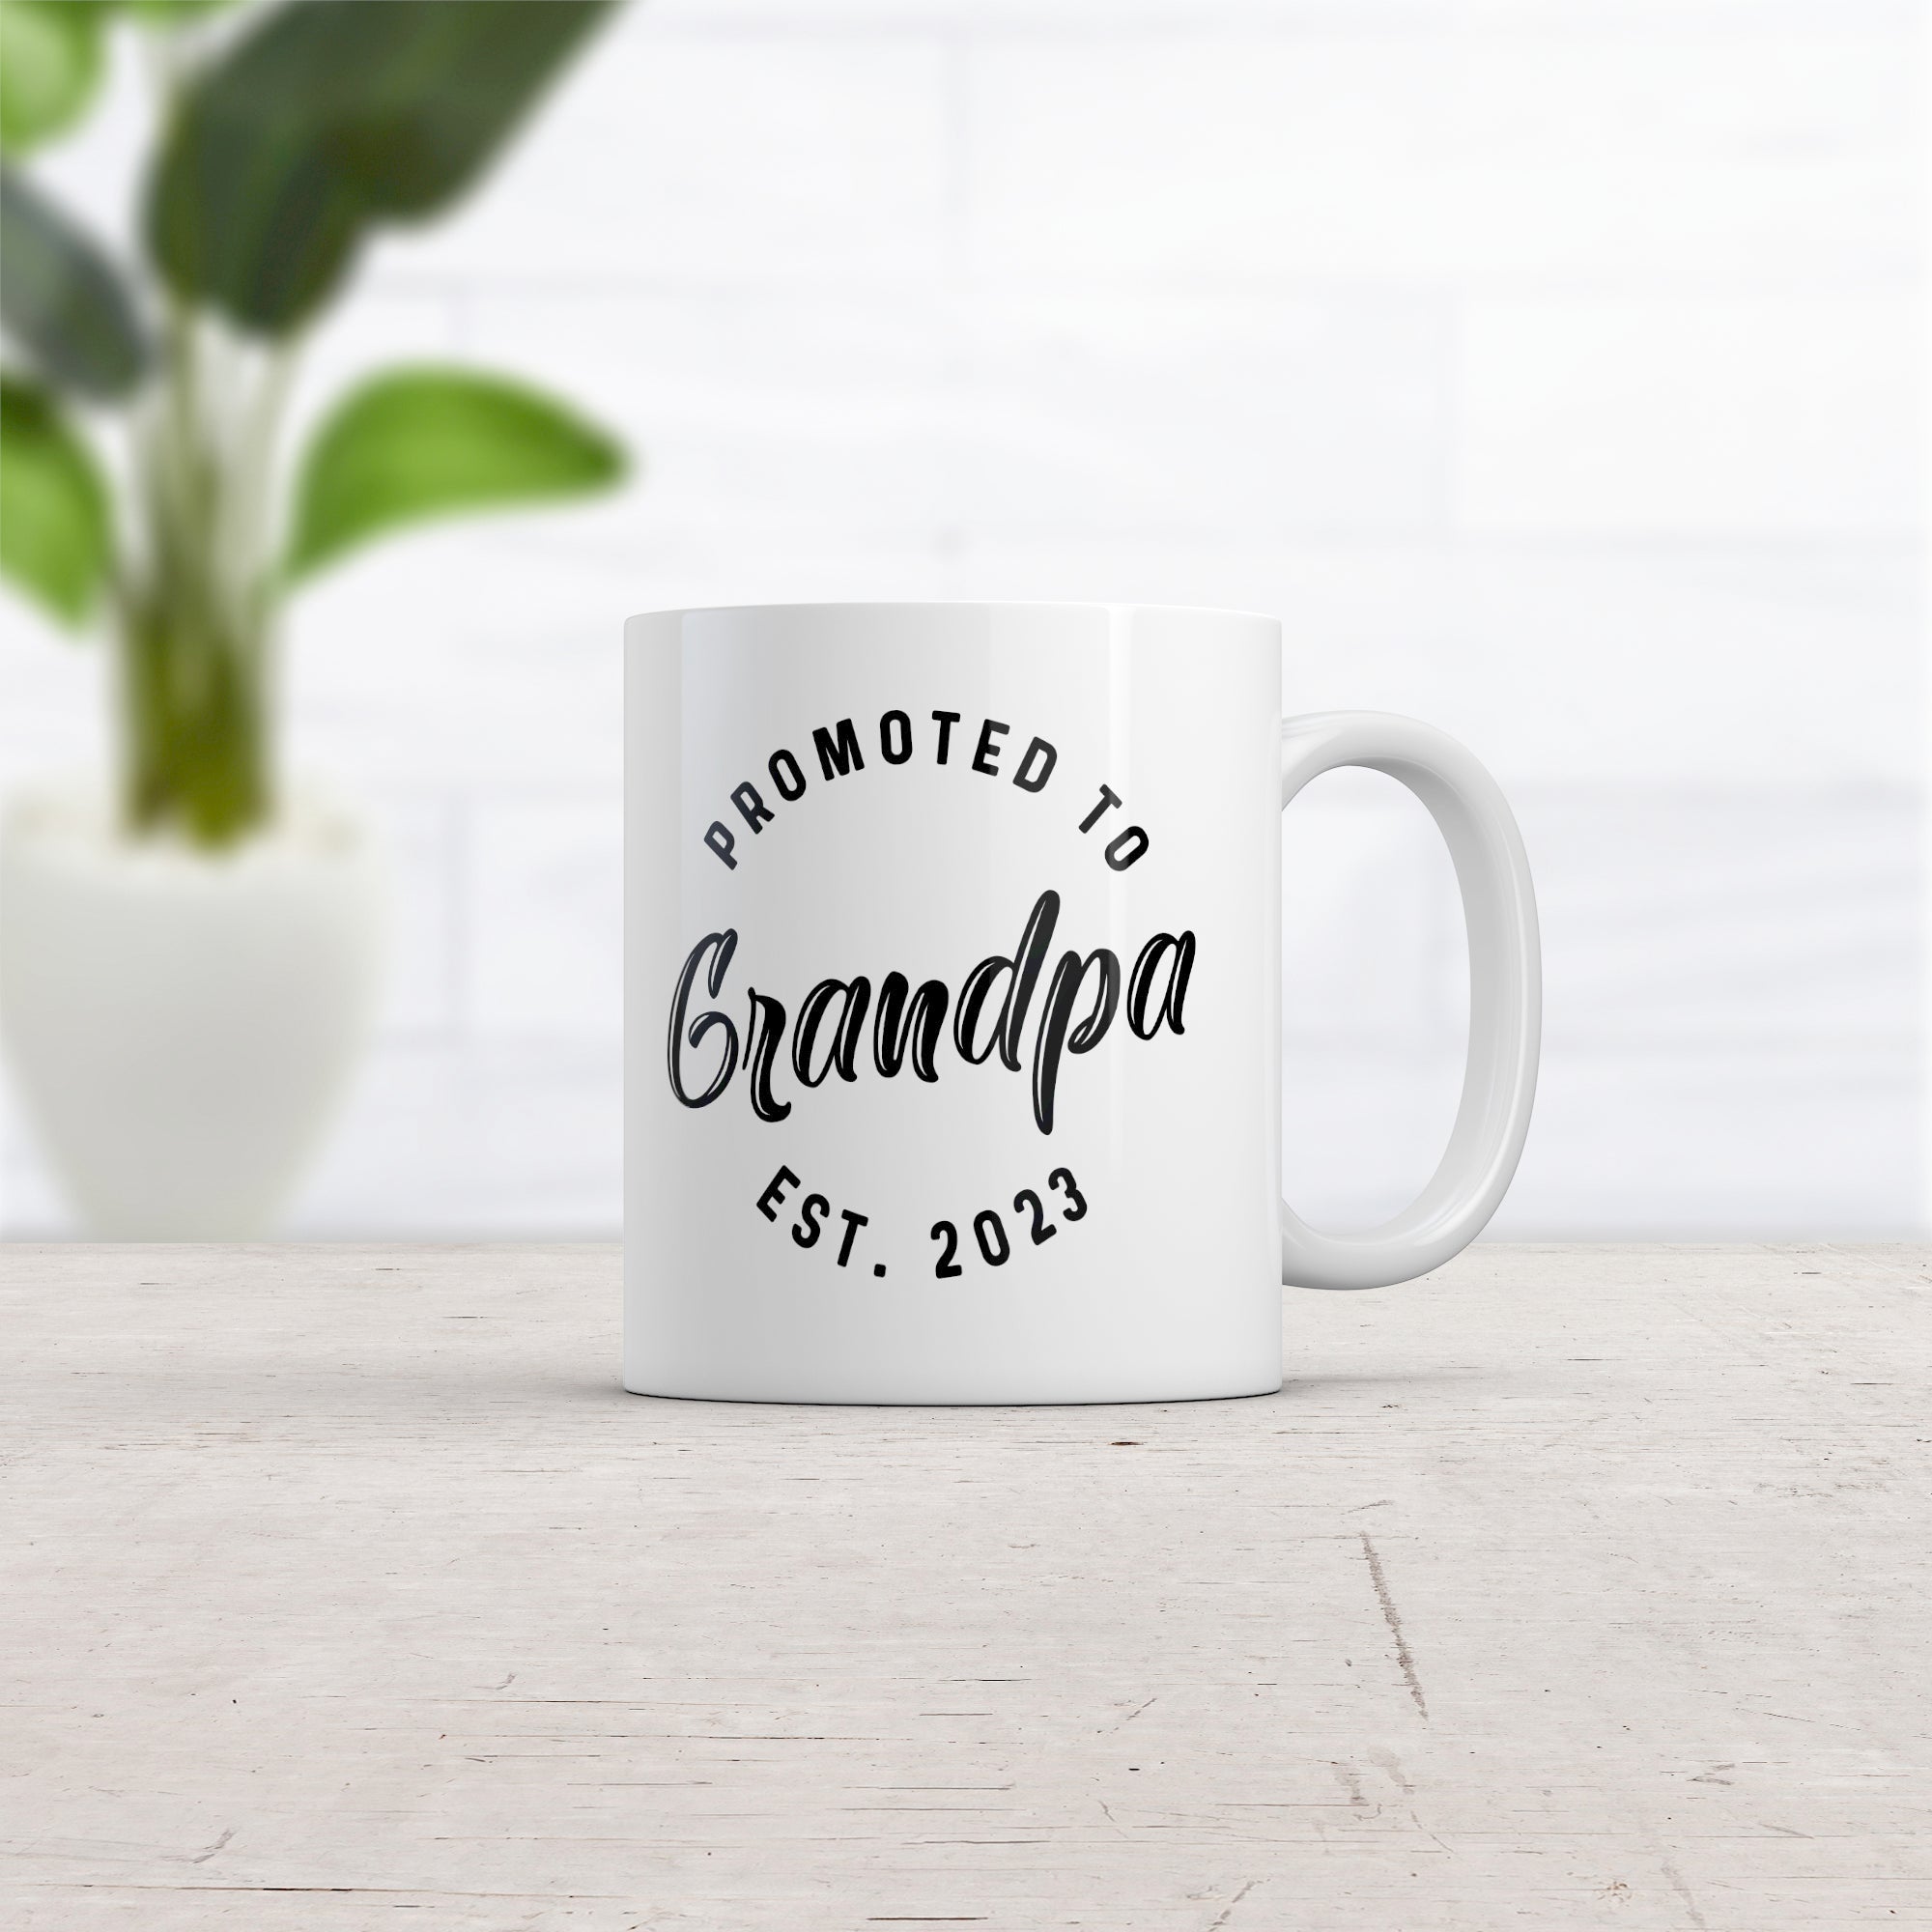 Funny White Promoted To Grandpa Coffee Mug Nerdy Father's Day Grandfather Tee